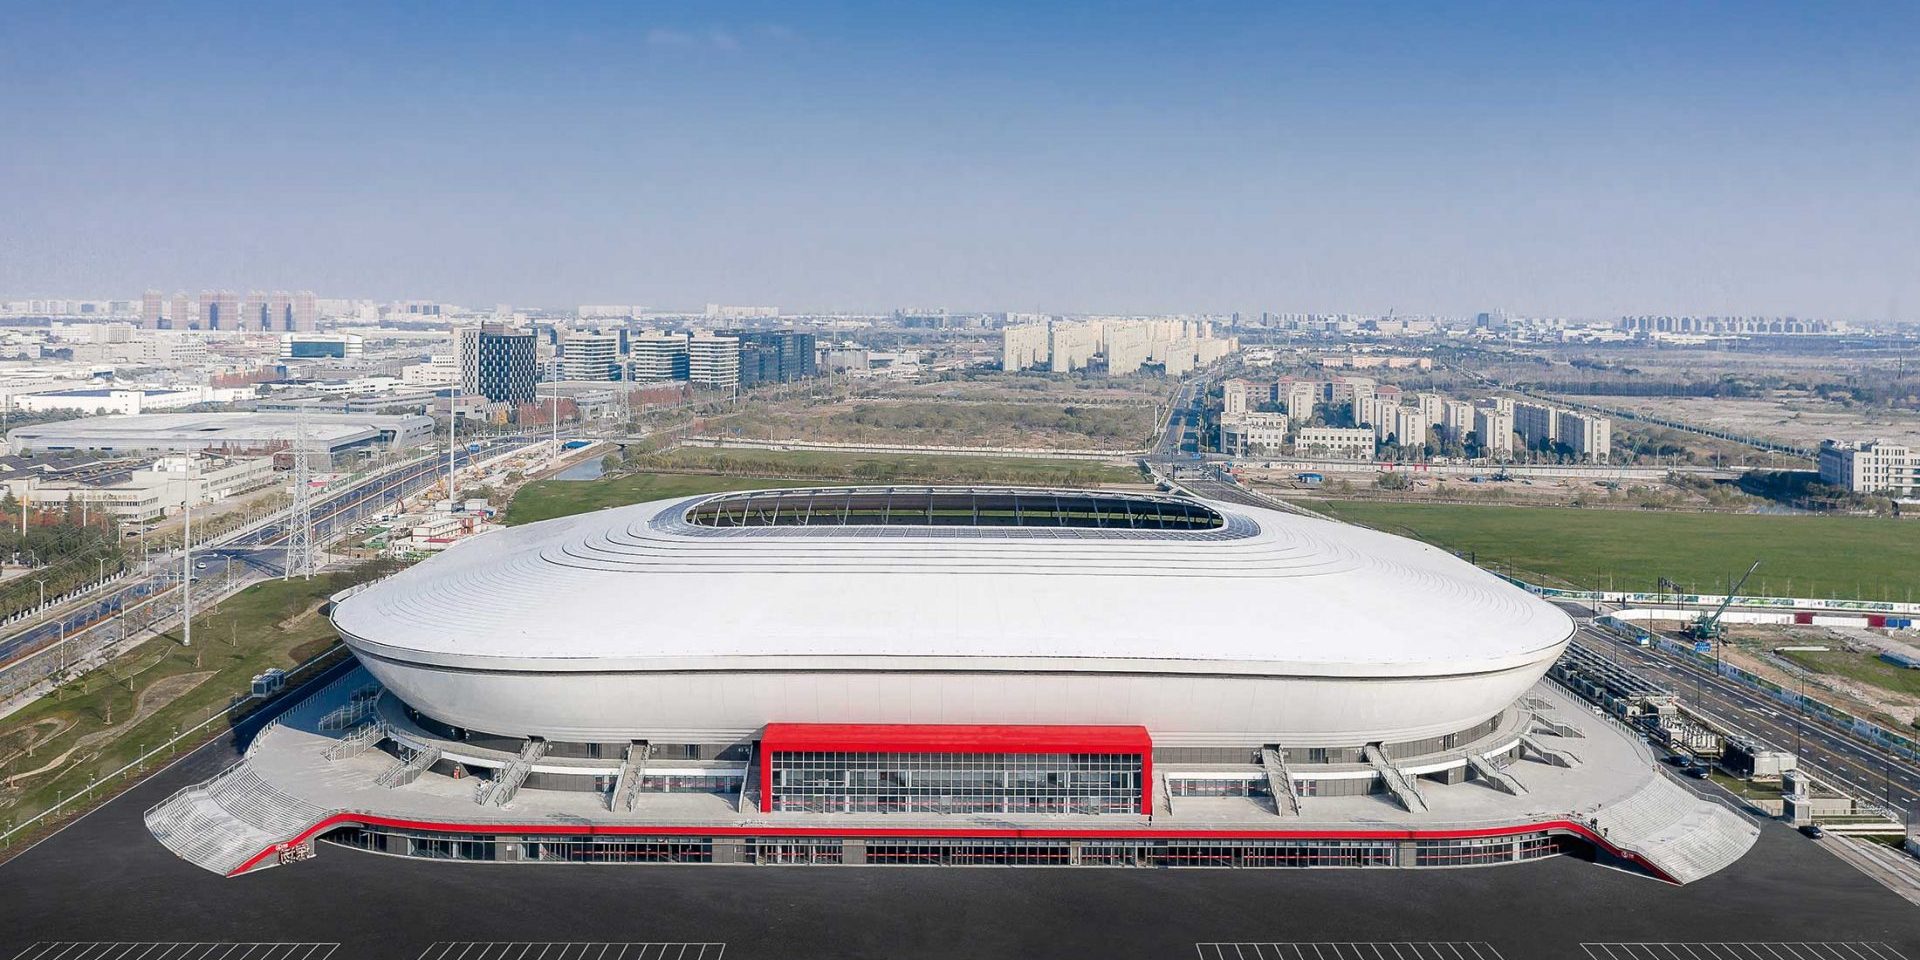 The Shanghai Pudong Football Stadium was to be a host stadium at AFC Asian Cup 2023